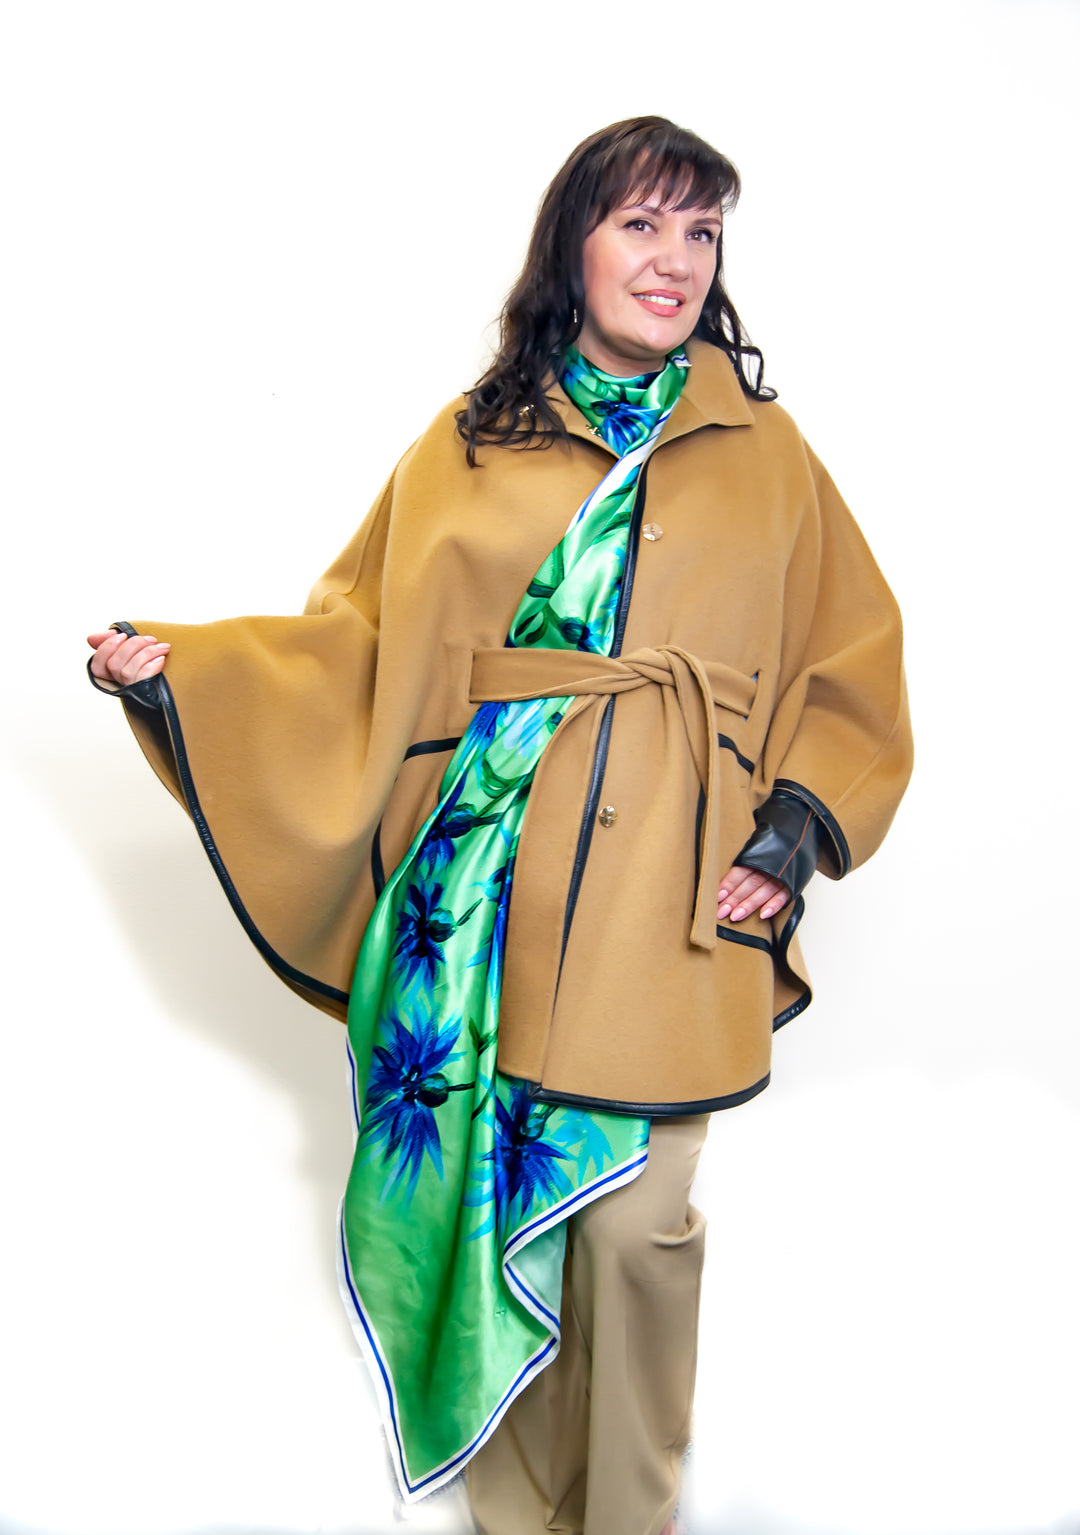 How To Style a silk scarf with Alesia Chaika camel wool cape coat poncho, over your wrist. Showcasing at the Musem Of Contemporary Art Chicago theCORNFLOWERS DREAM Royal Blue and Green Wearable Art 100% Pure Silk Scarf by Alesia Chaika. Copy of an original signed fine artwork on canvas.